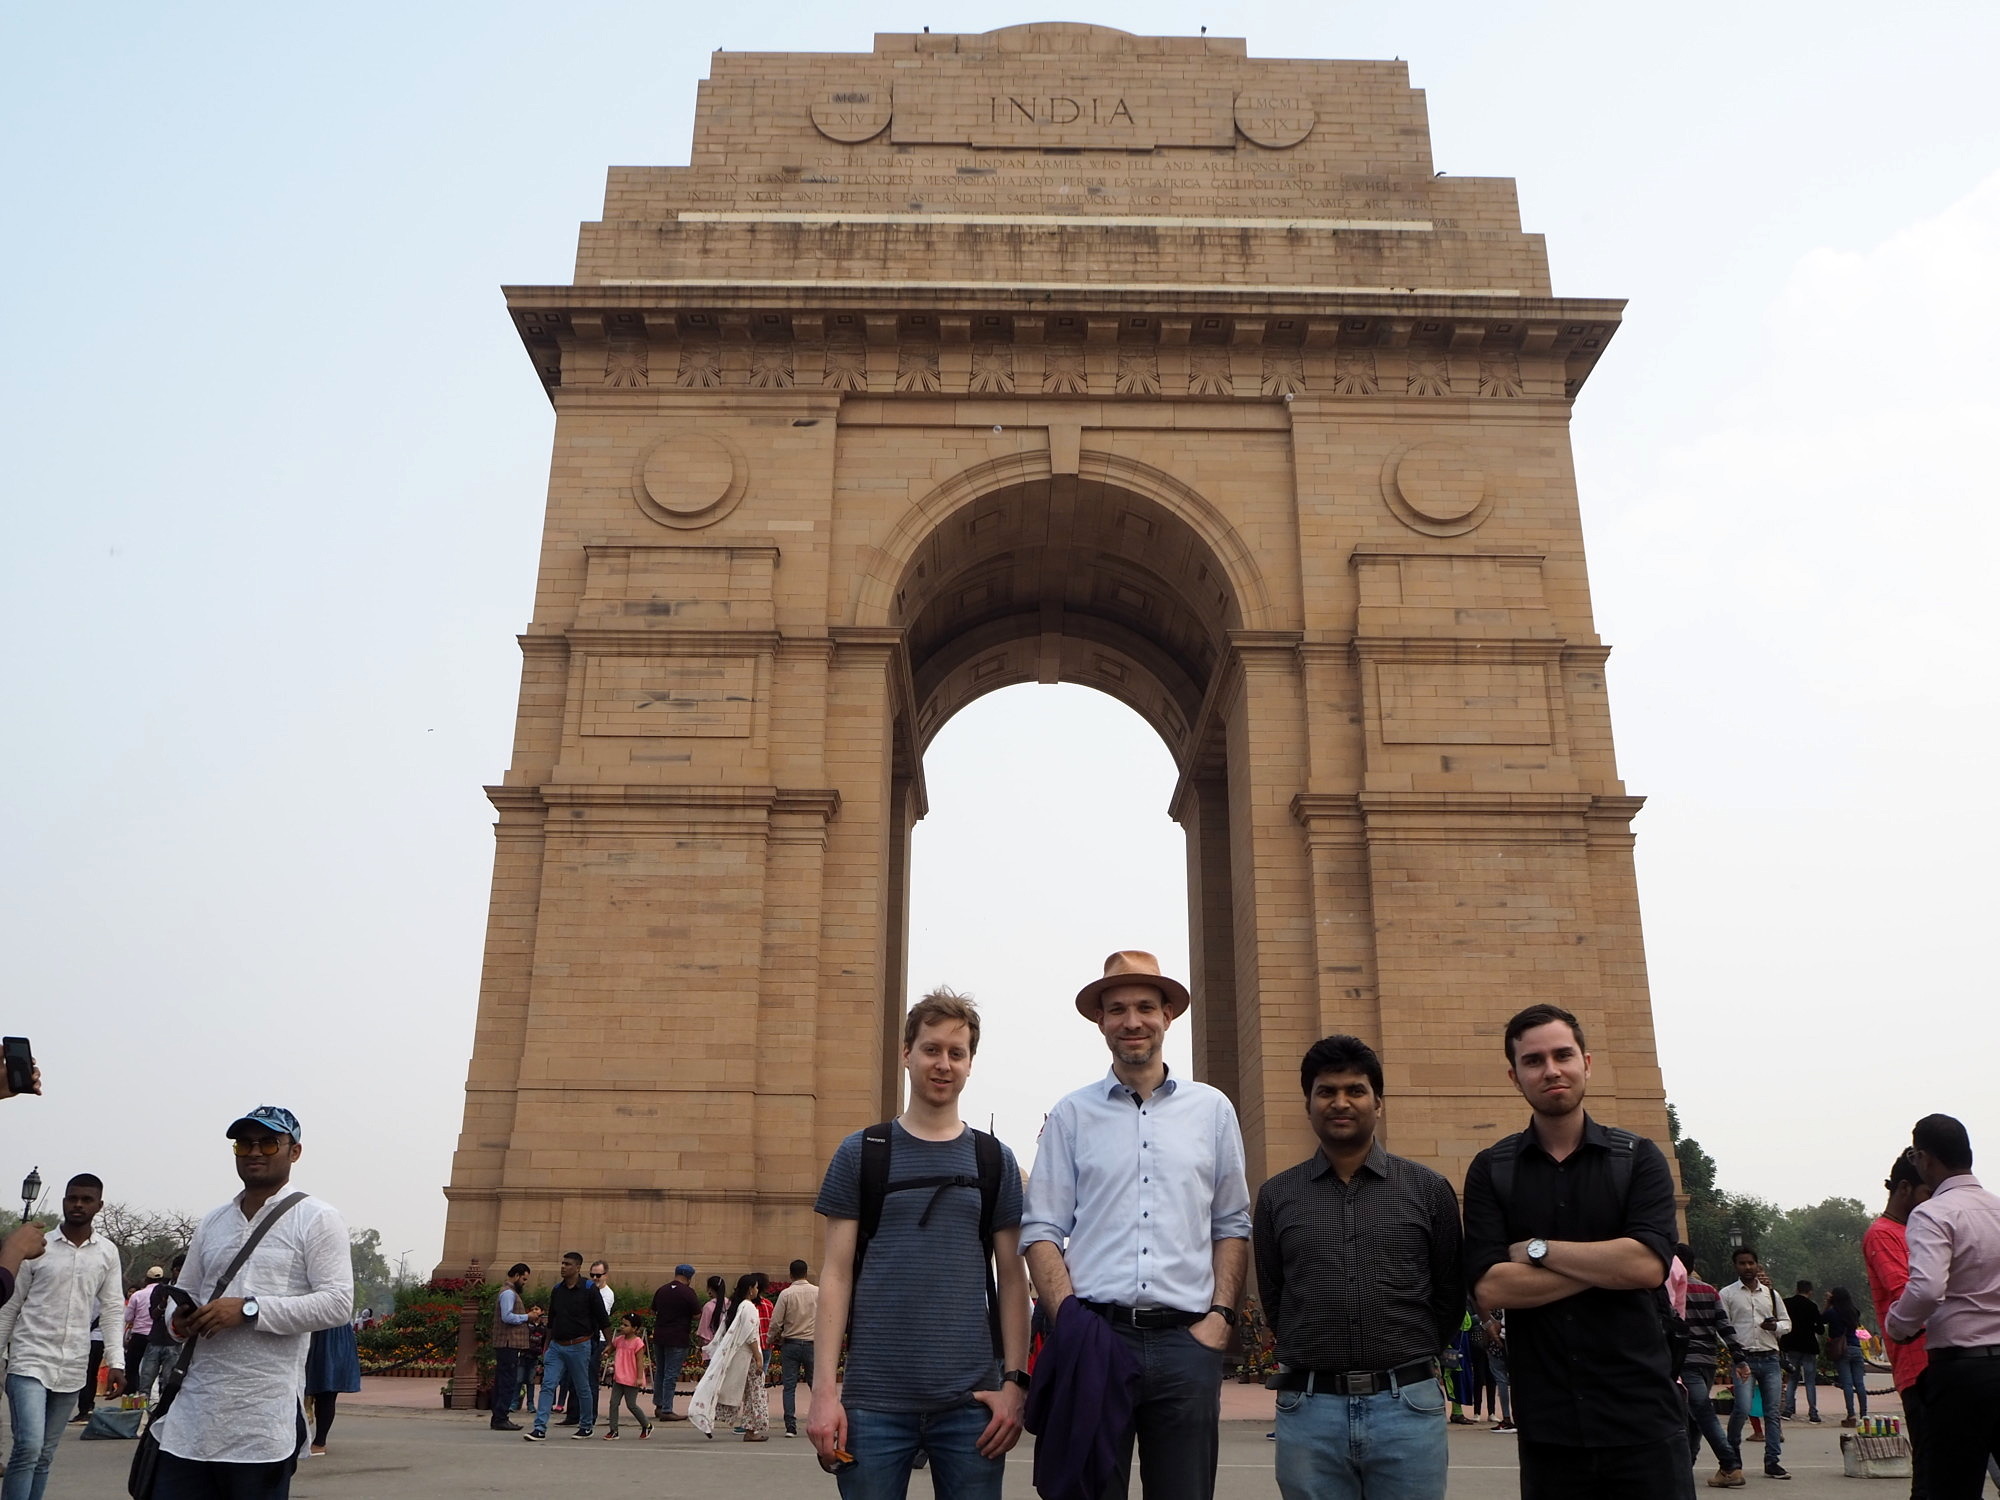 Group photo of four researchers from the technical faculties at Friedrich-Alexander-Universität Erlangen-Nürnberg and the Indian Institute of Technology Delhi visiting India Gate in Delhi.